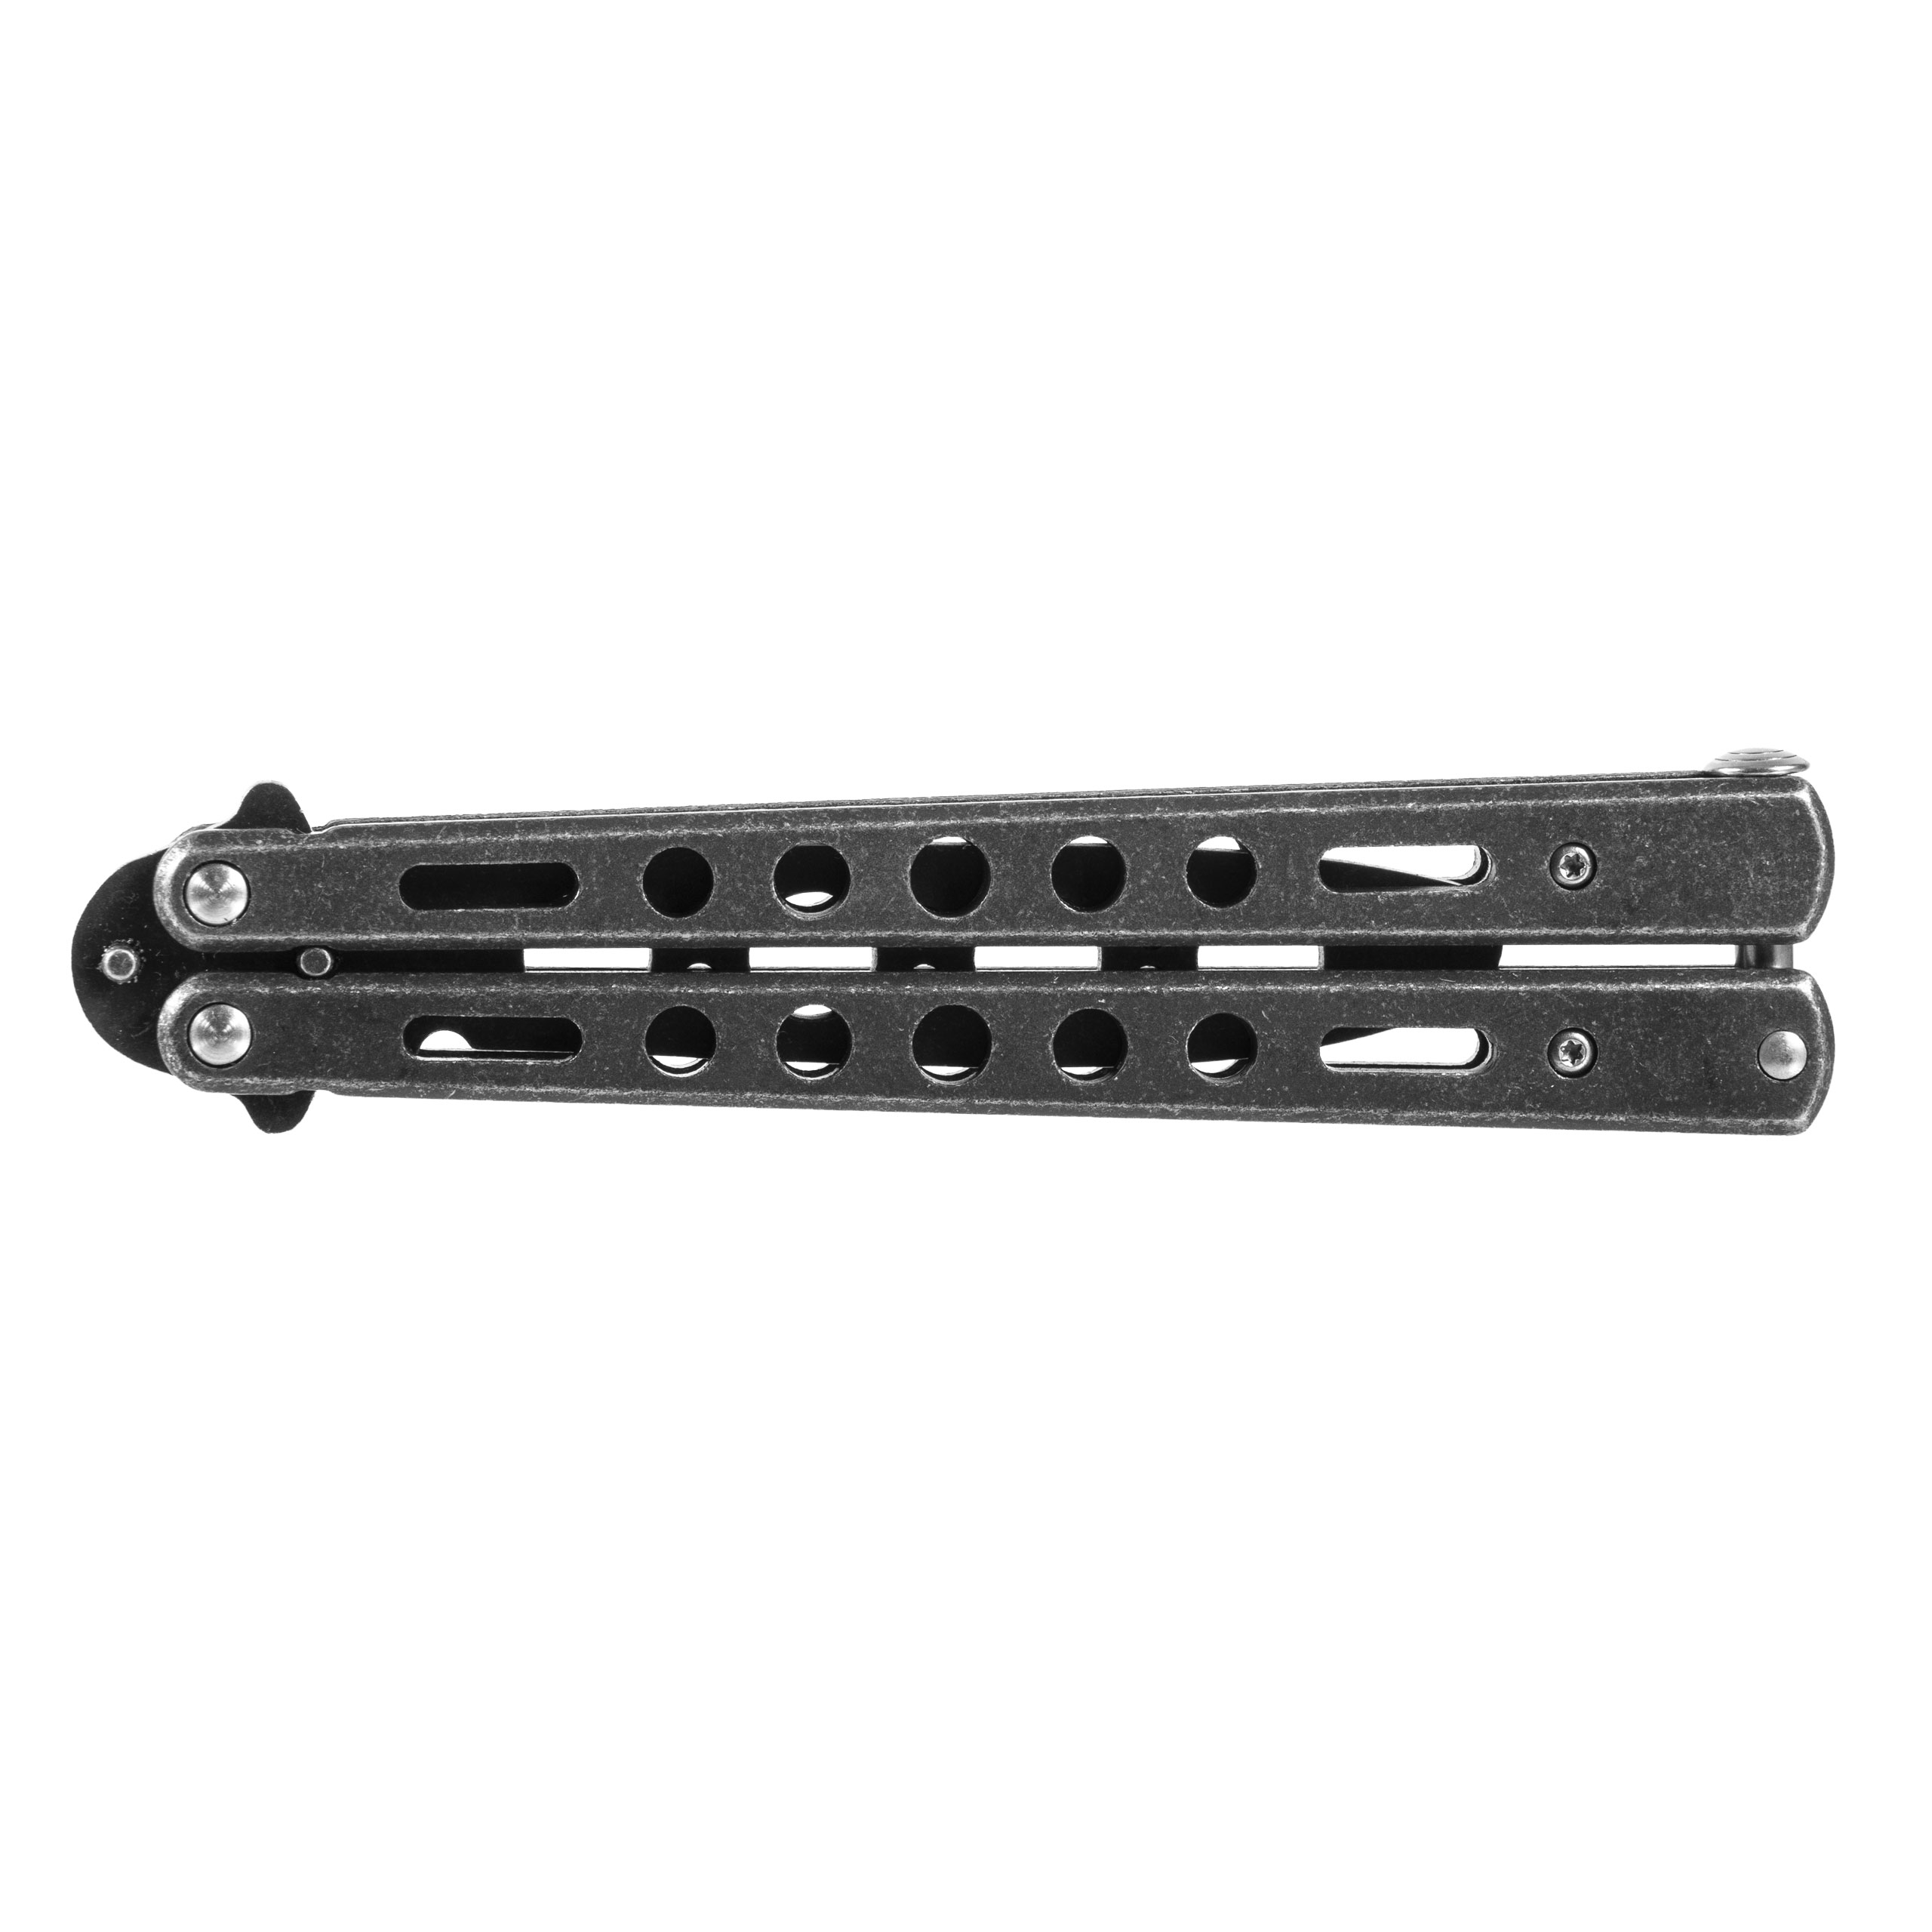 Elite Force EF168 Balisong Trainer butterfly knife